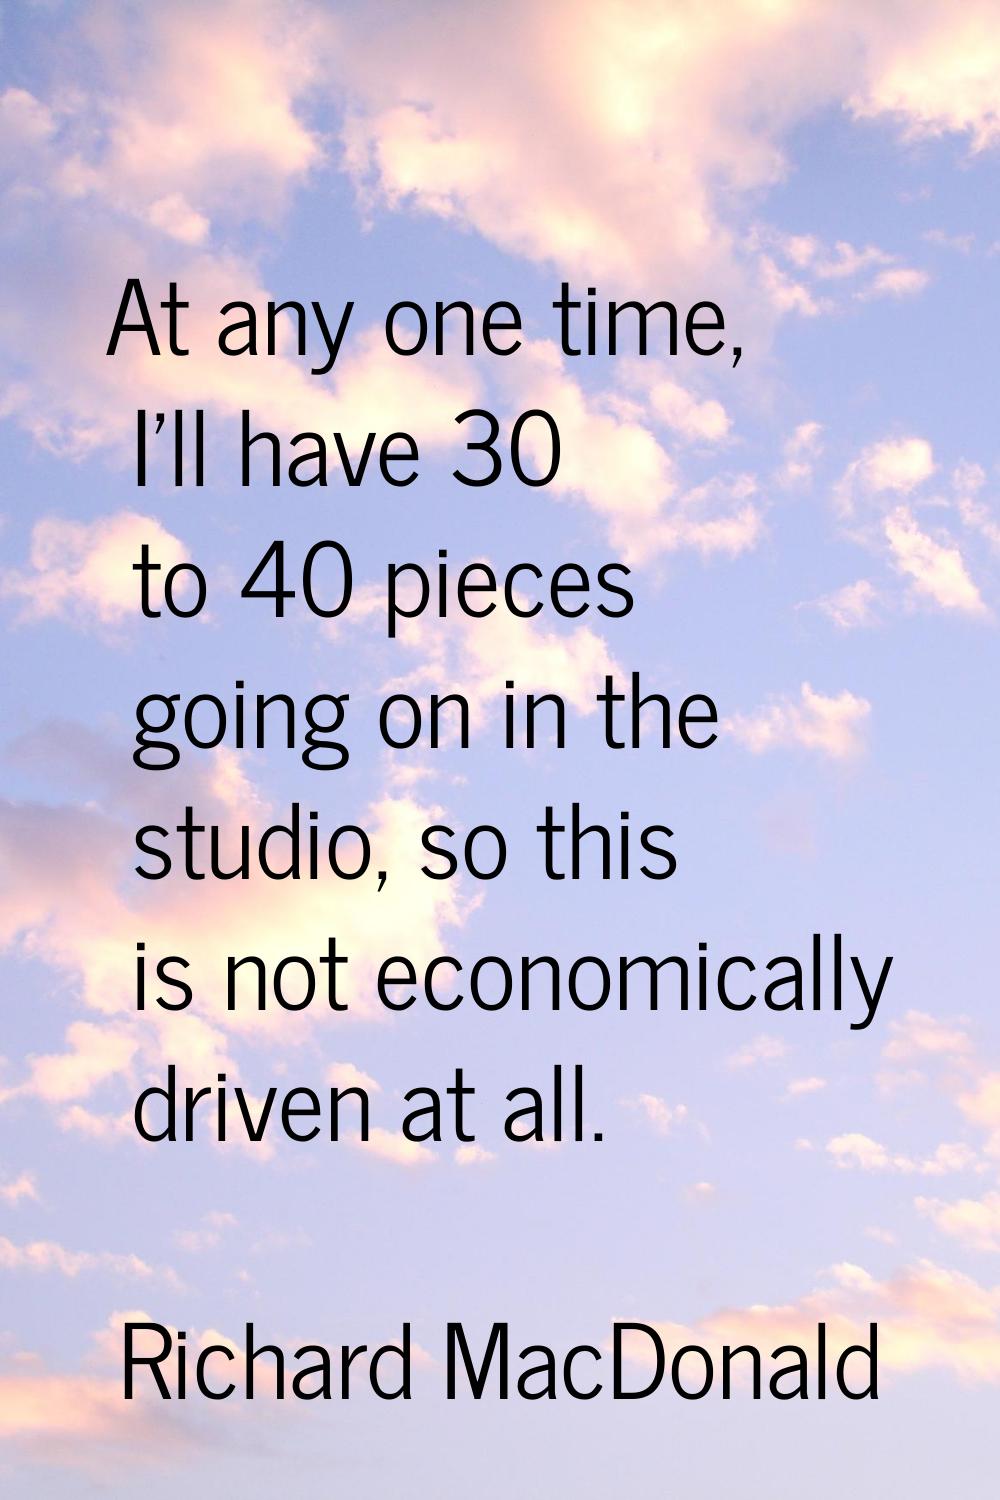 At any one time, I'll have 30 to 40 pieces going on in the studio, so this is not economically driv